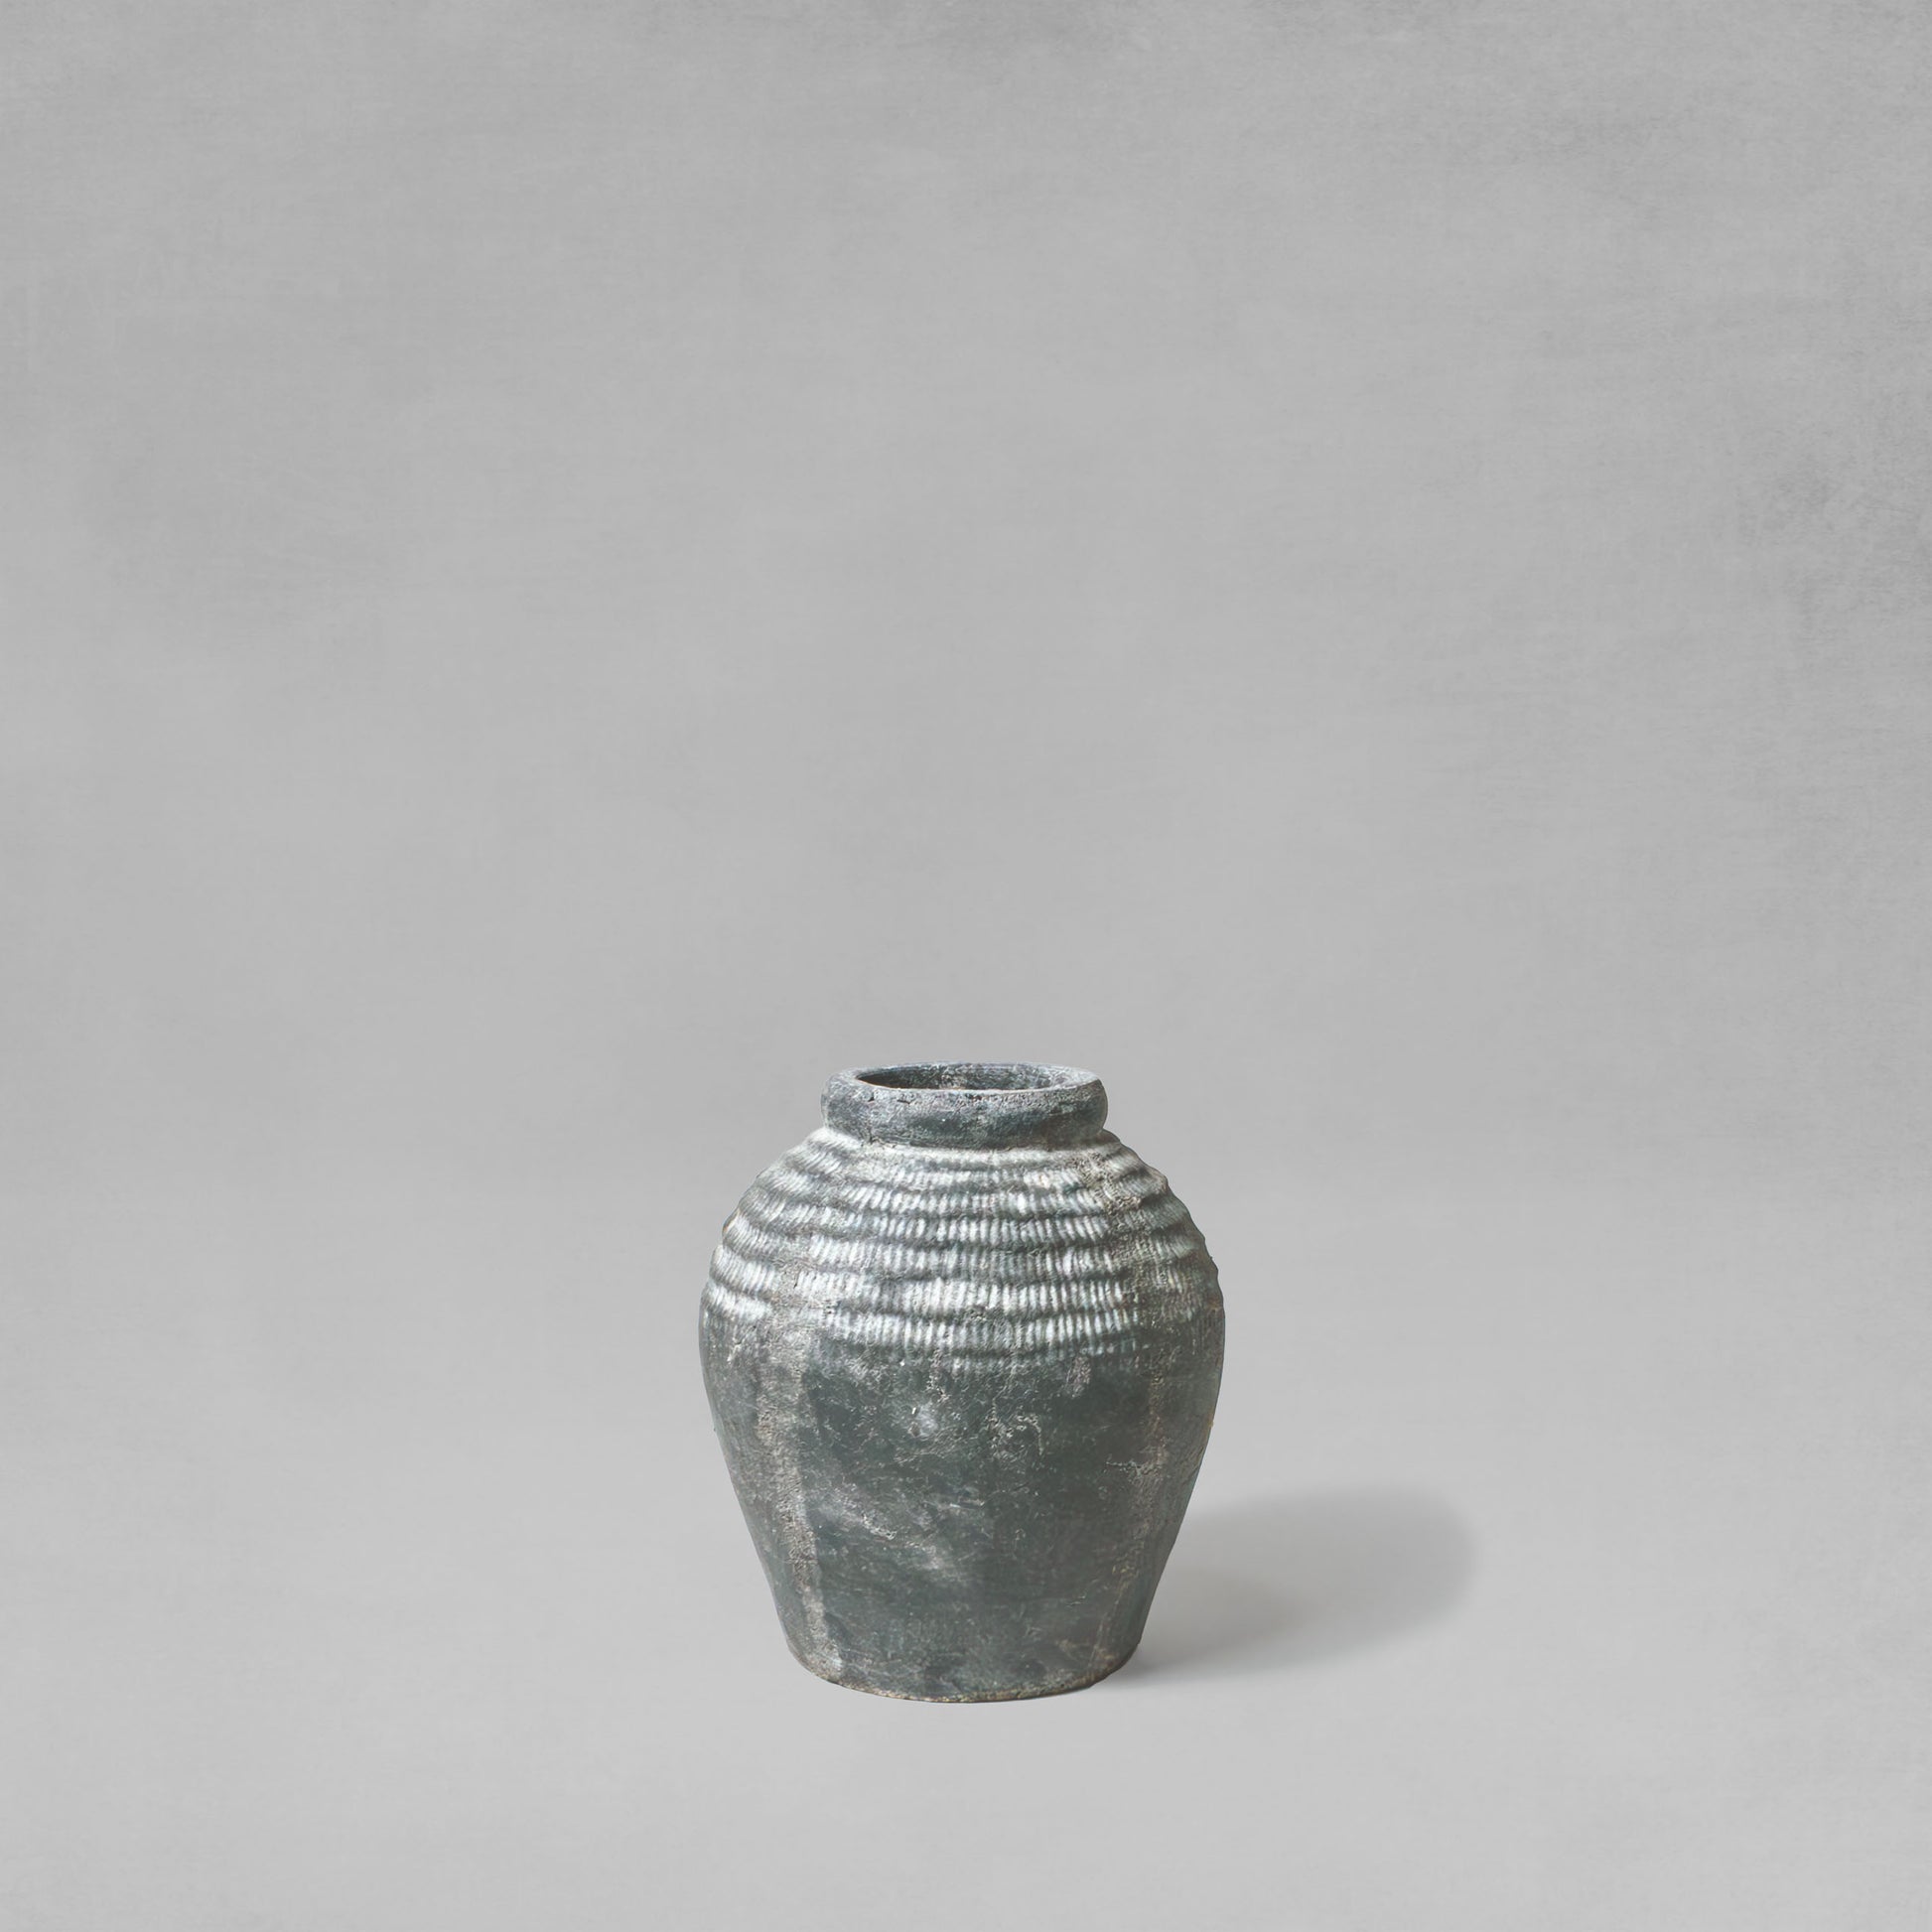 Small artisanal weathered gray earthenware vase with gray background.